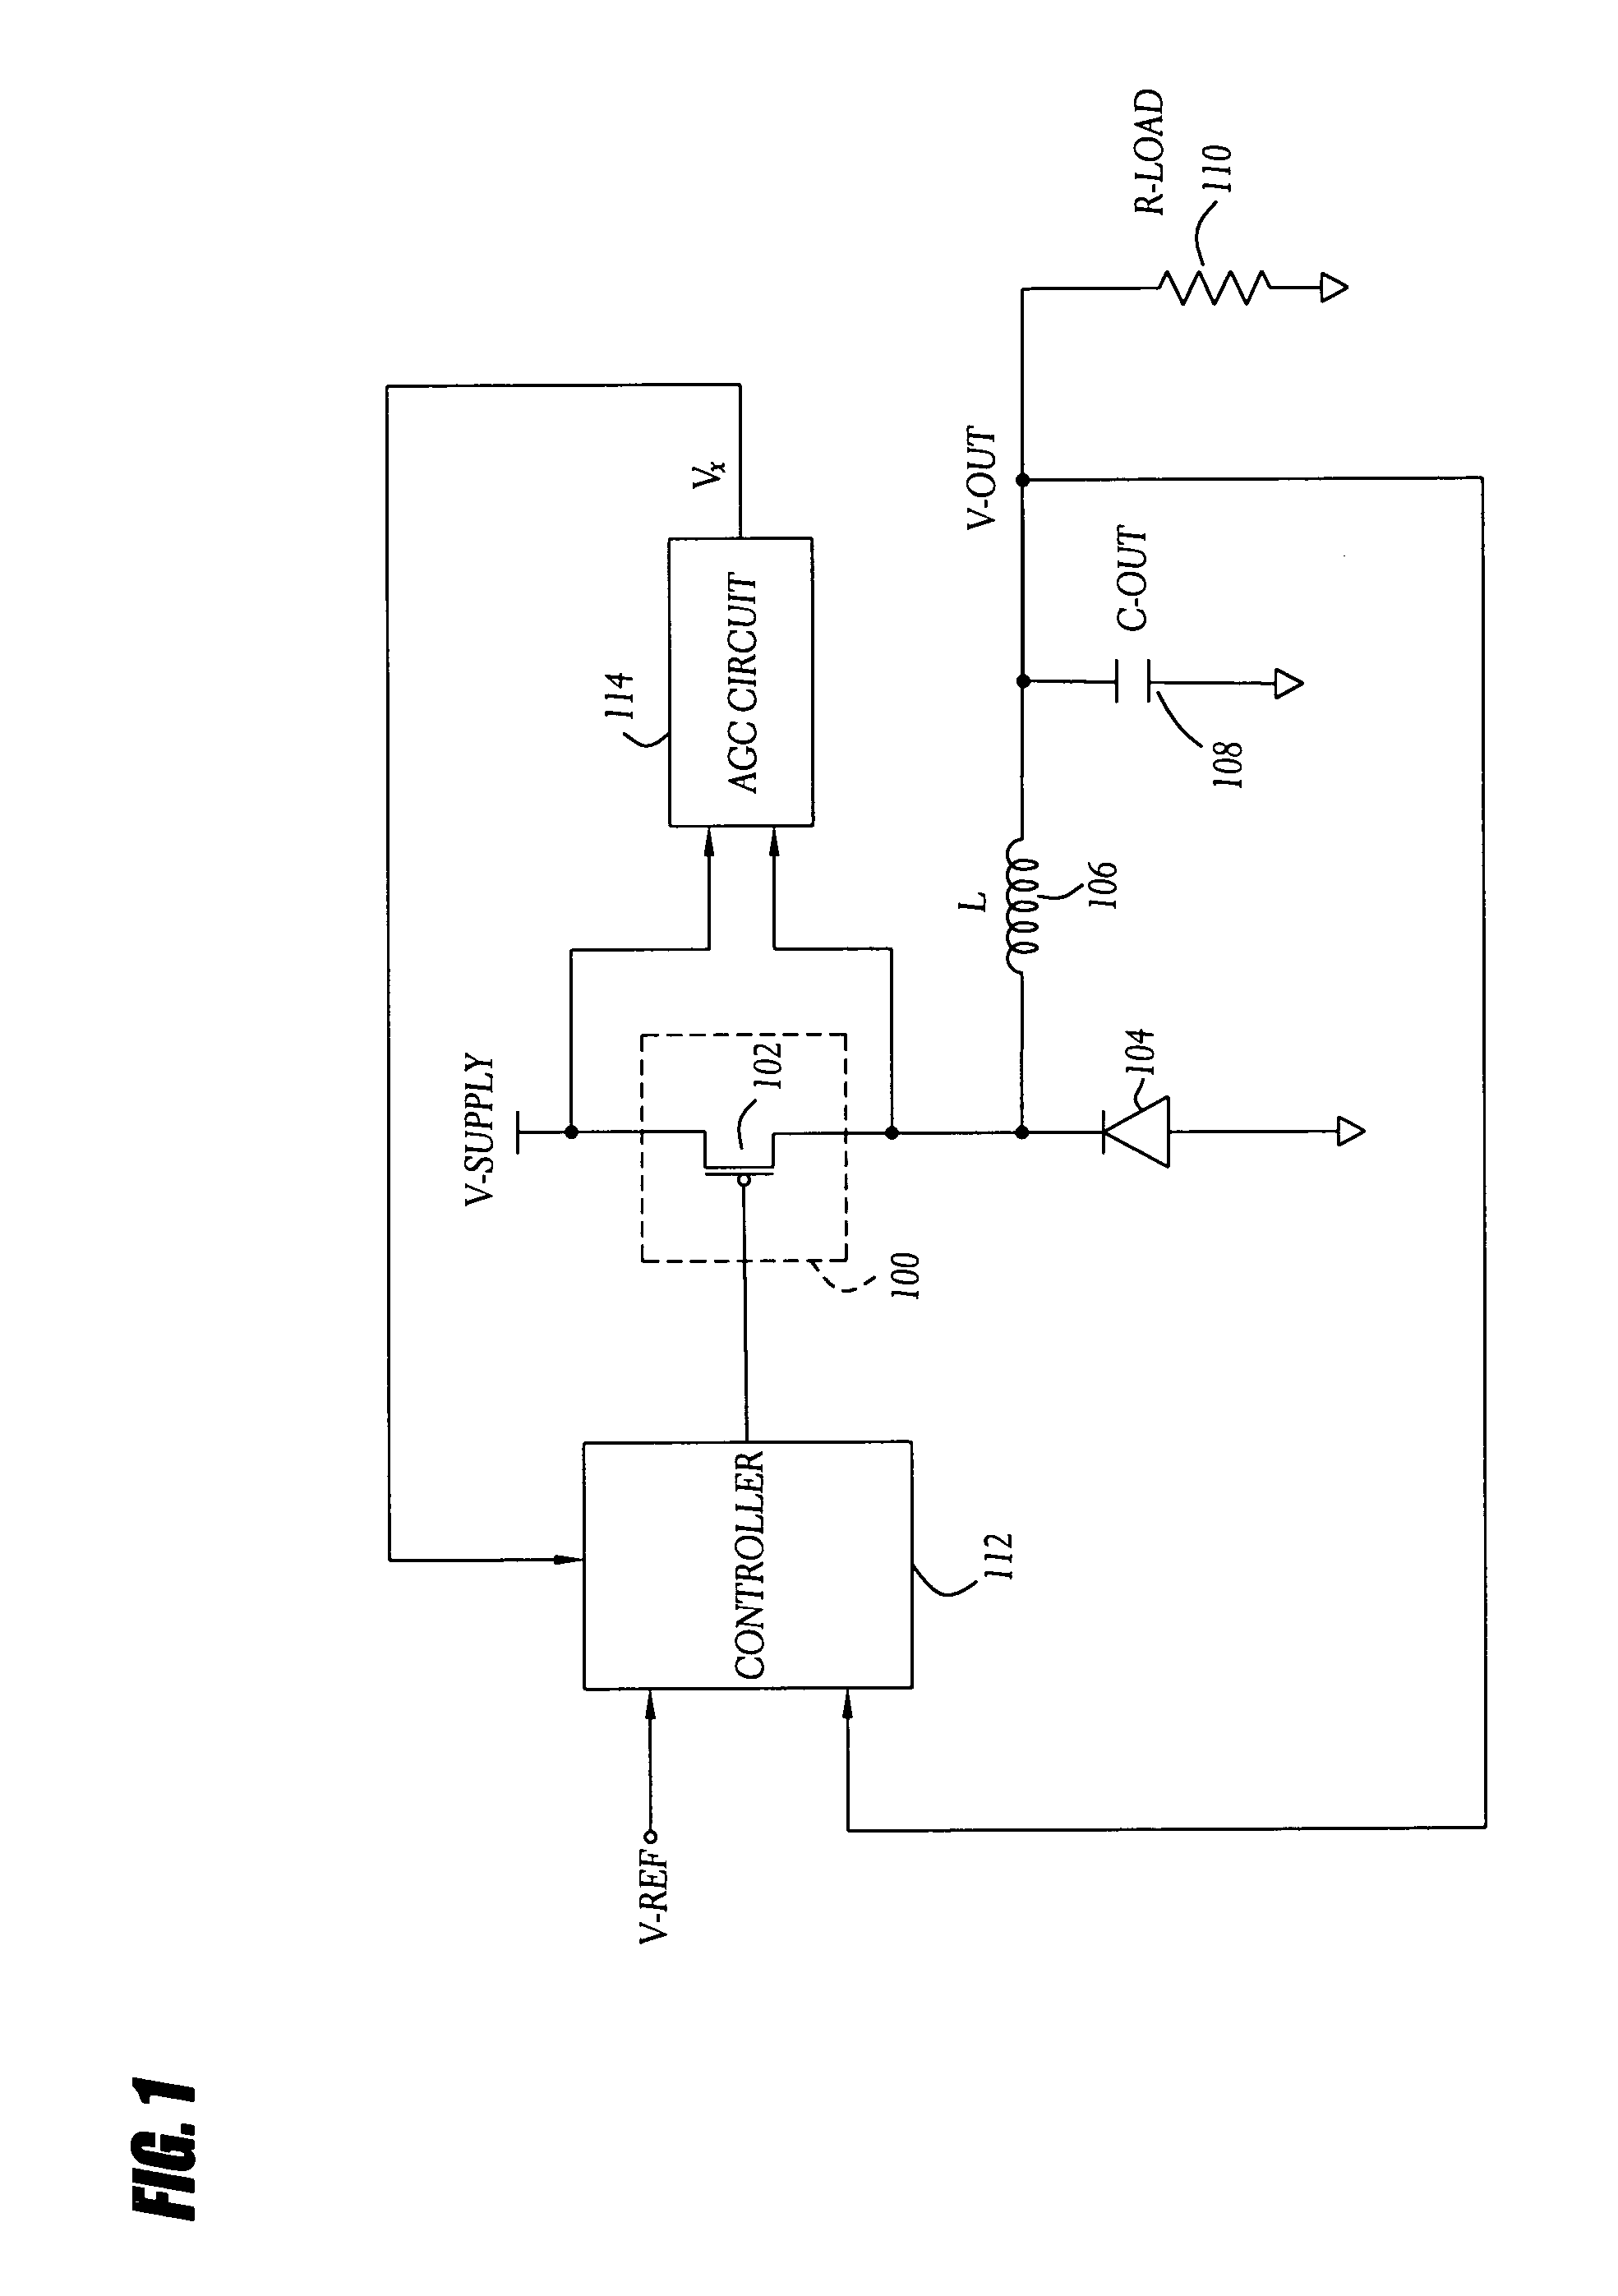 Automatic gain control technique for current monitoring in current-mode switching regulators